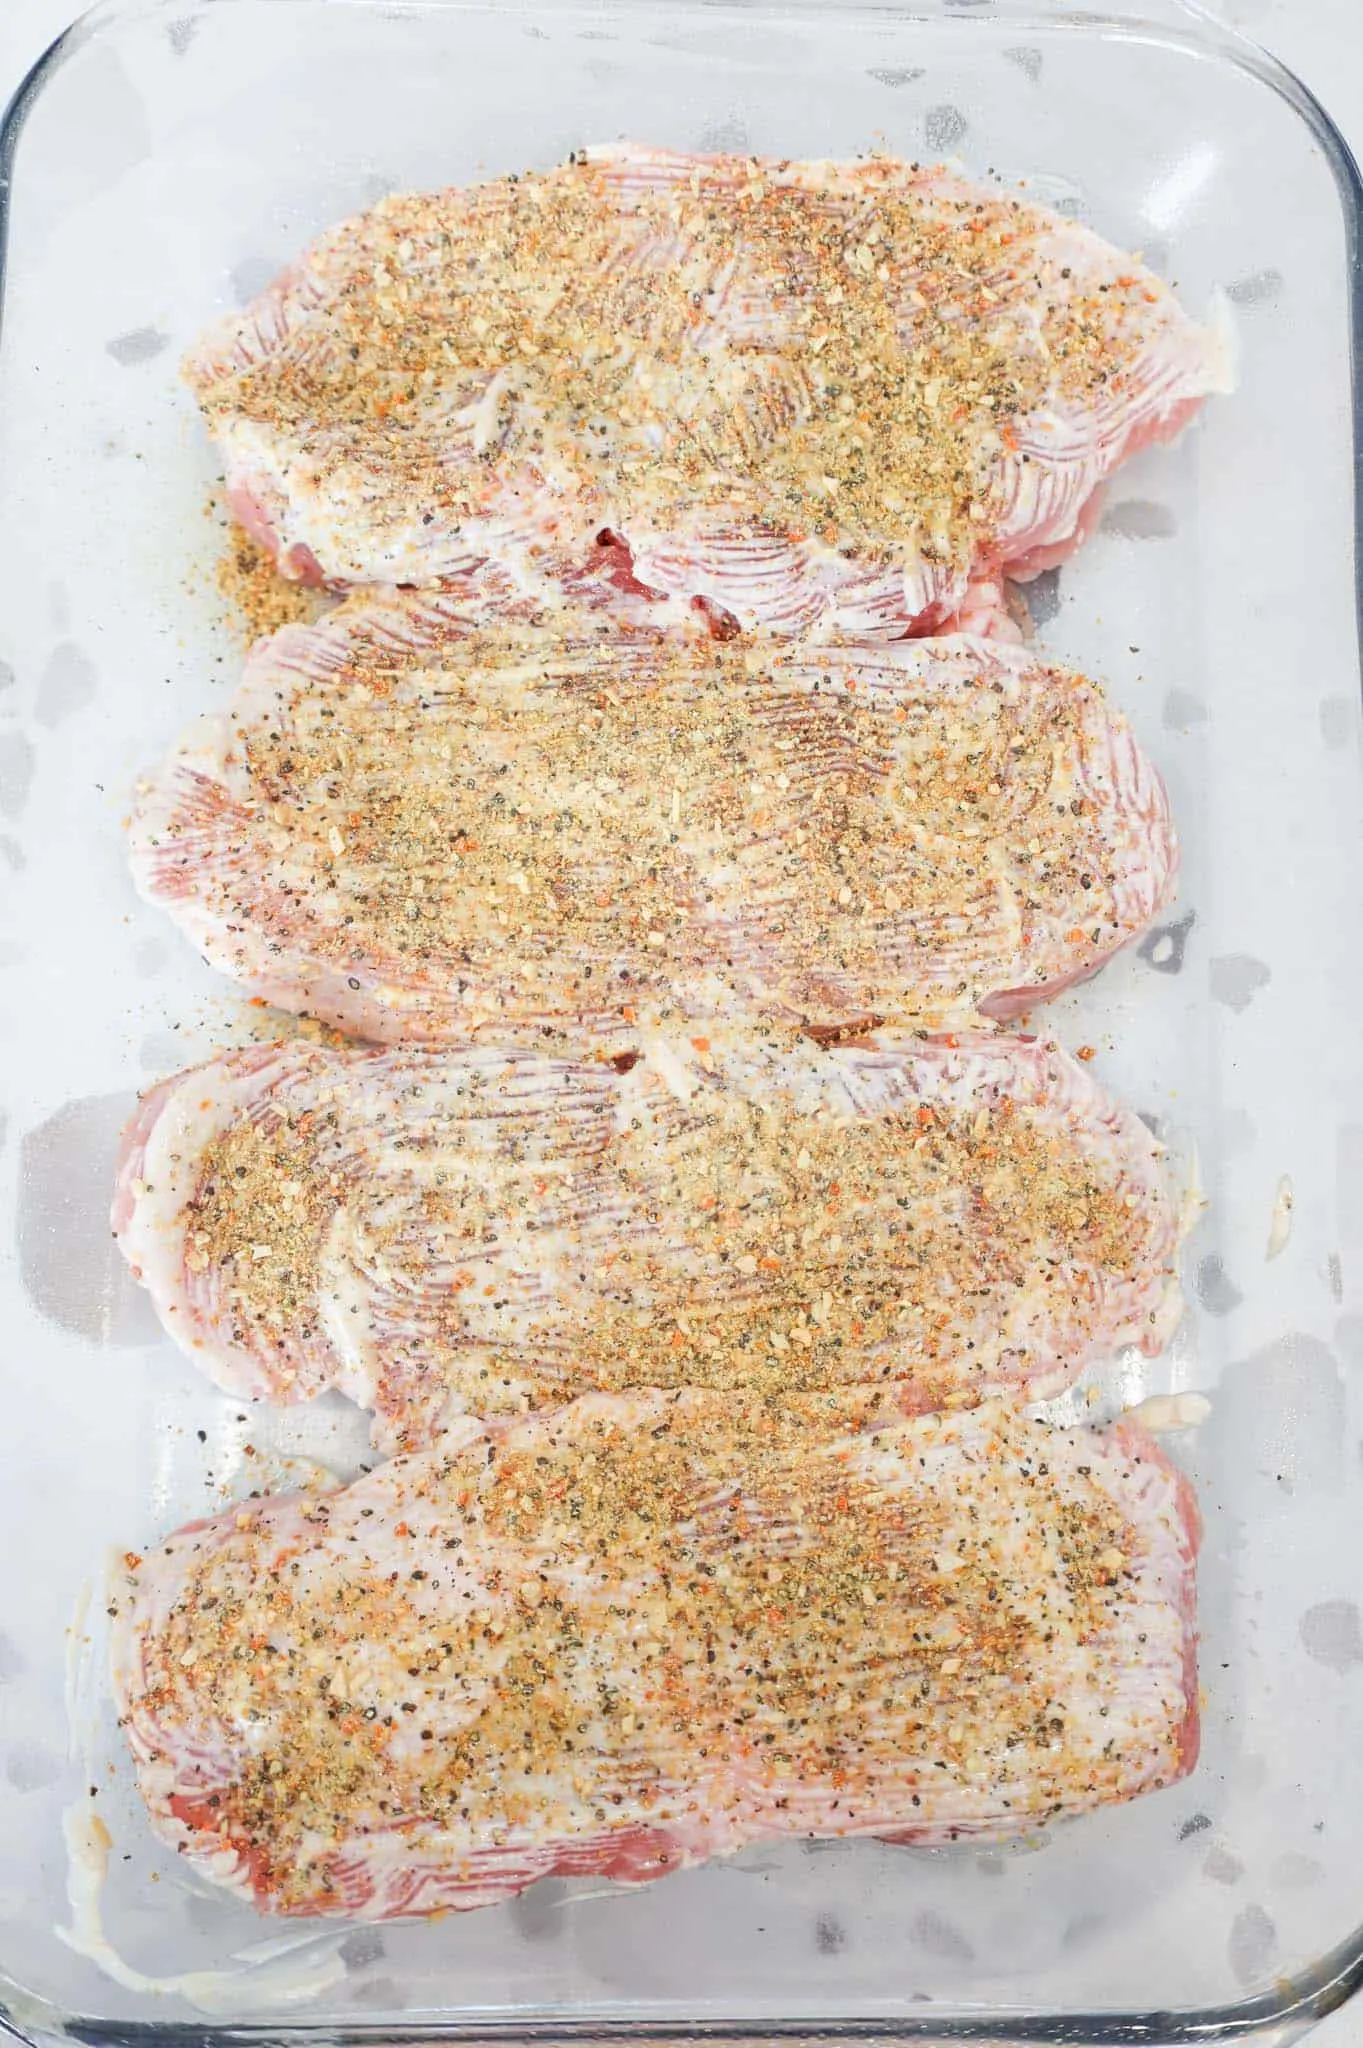 lemon pepper and mayo mixture on top of pork chops in a baking dish